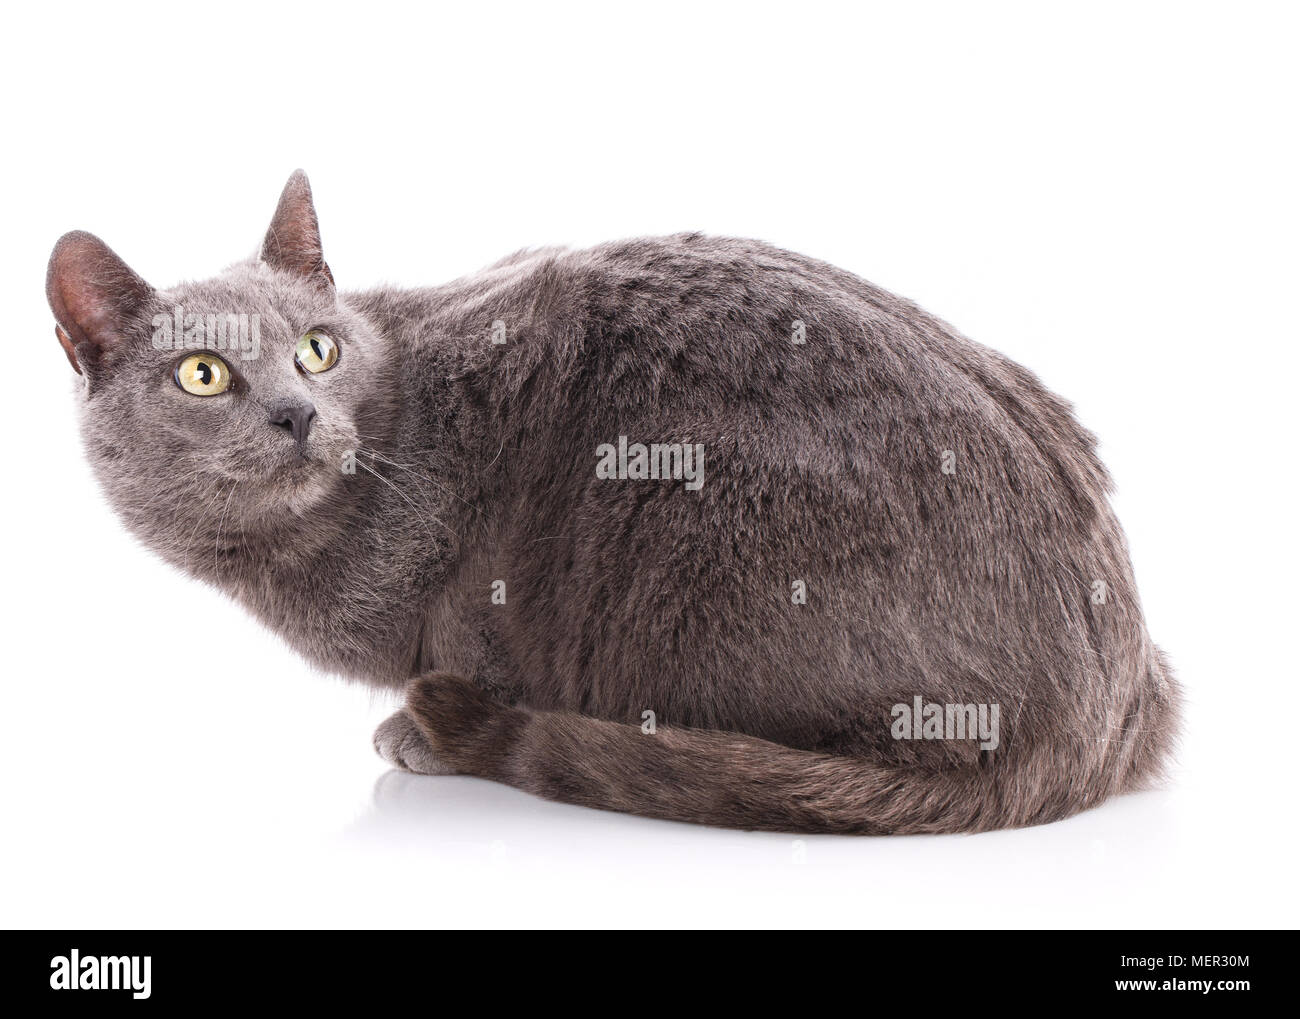 Cat without breed. A simple gray cat Stock Photo